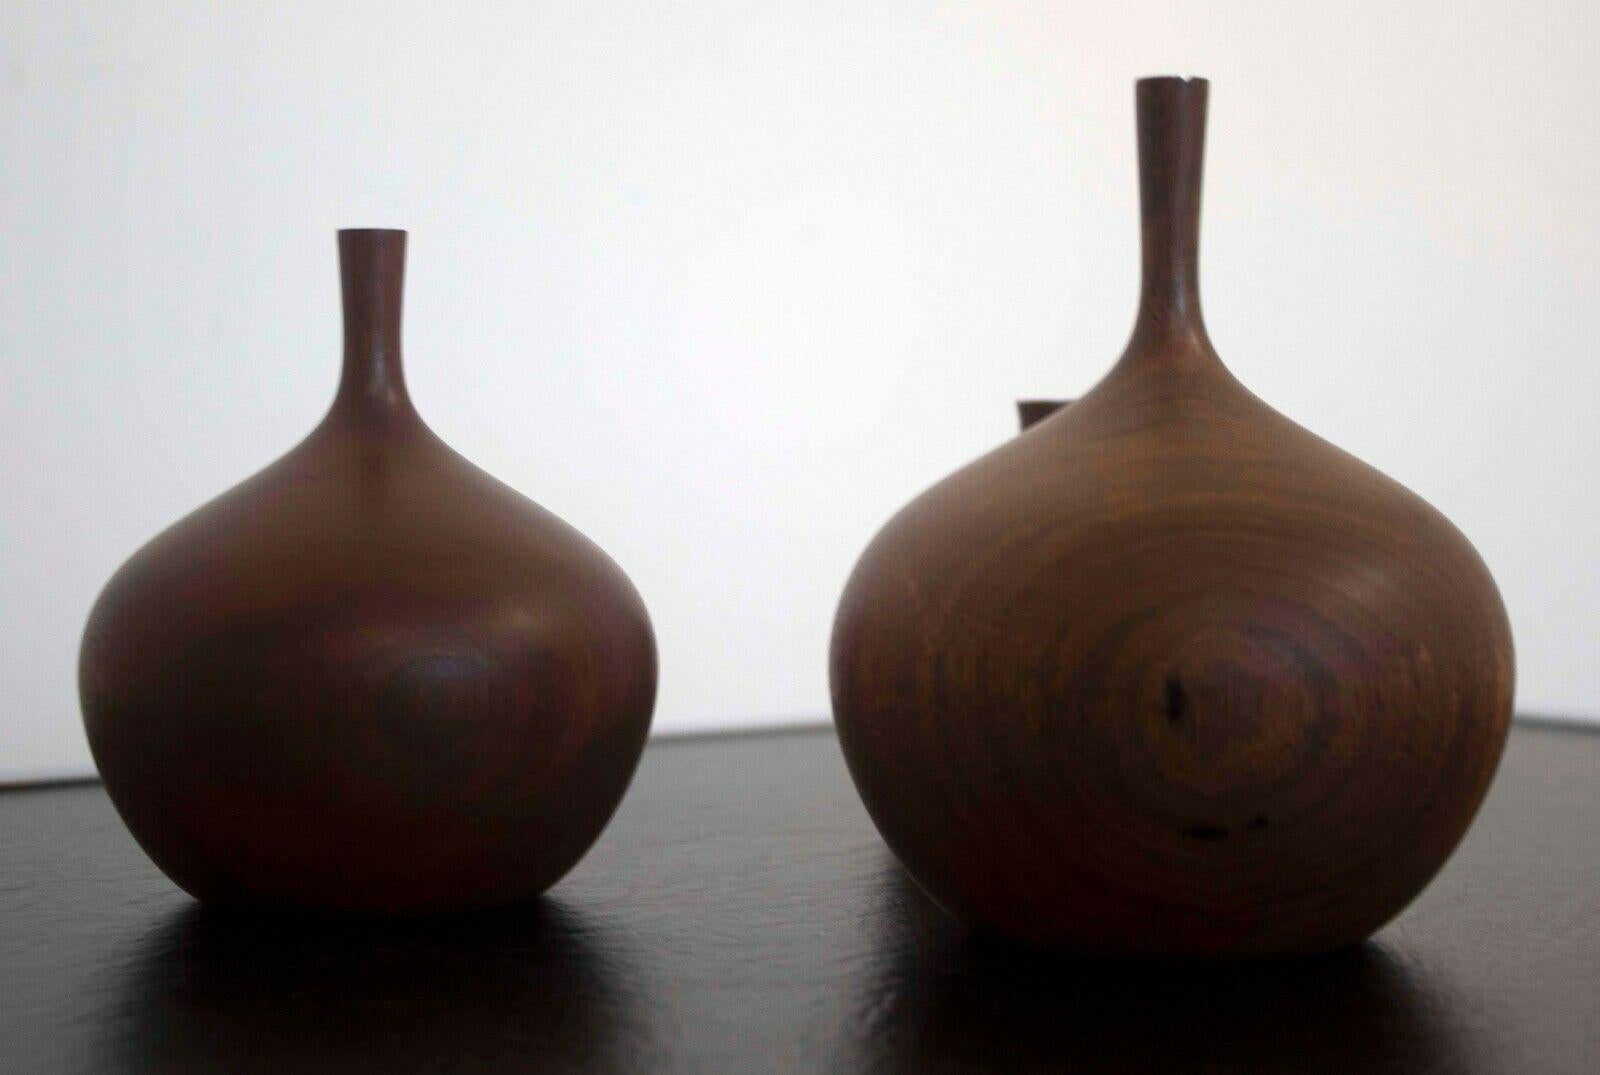 Le Shoppe Too in Michigan is stunning set of 3 carved walnut wood vessels signed by Osolnik Originals. Dimensions: 5.75h x 4.5 dia / 5h x 4 dia / 3.75h x 3 dia. In excellent vintage condition. Rude Osolnik considered to be one of the fathers of